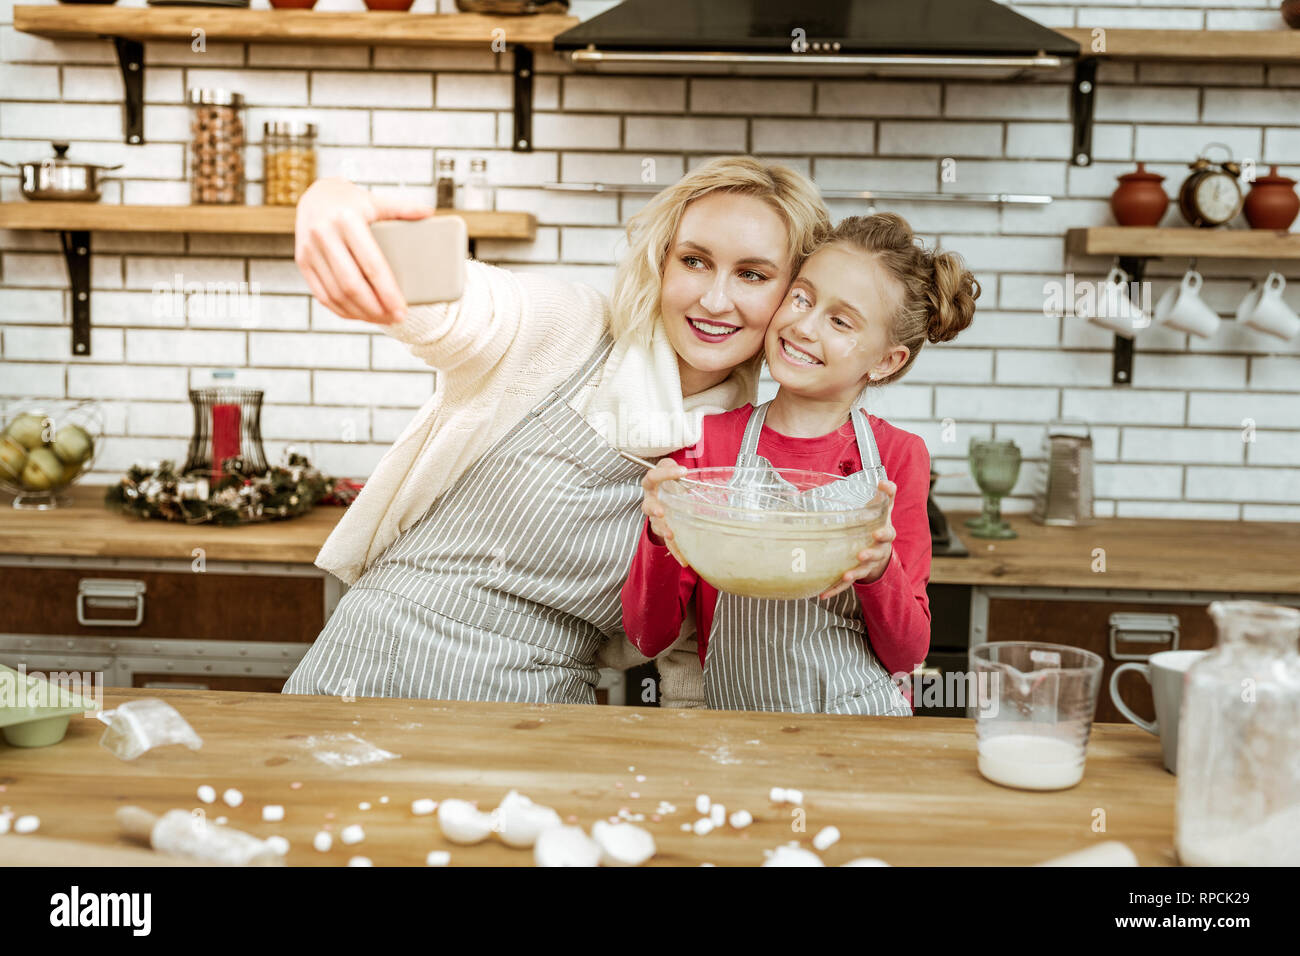 Smiling beaming lady making photo of herself with positive daughter Stock Photo